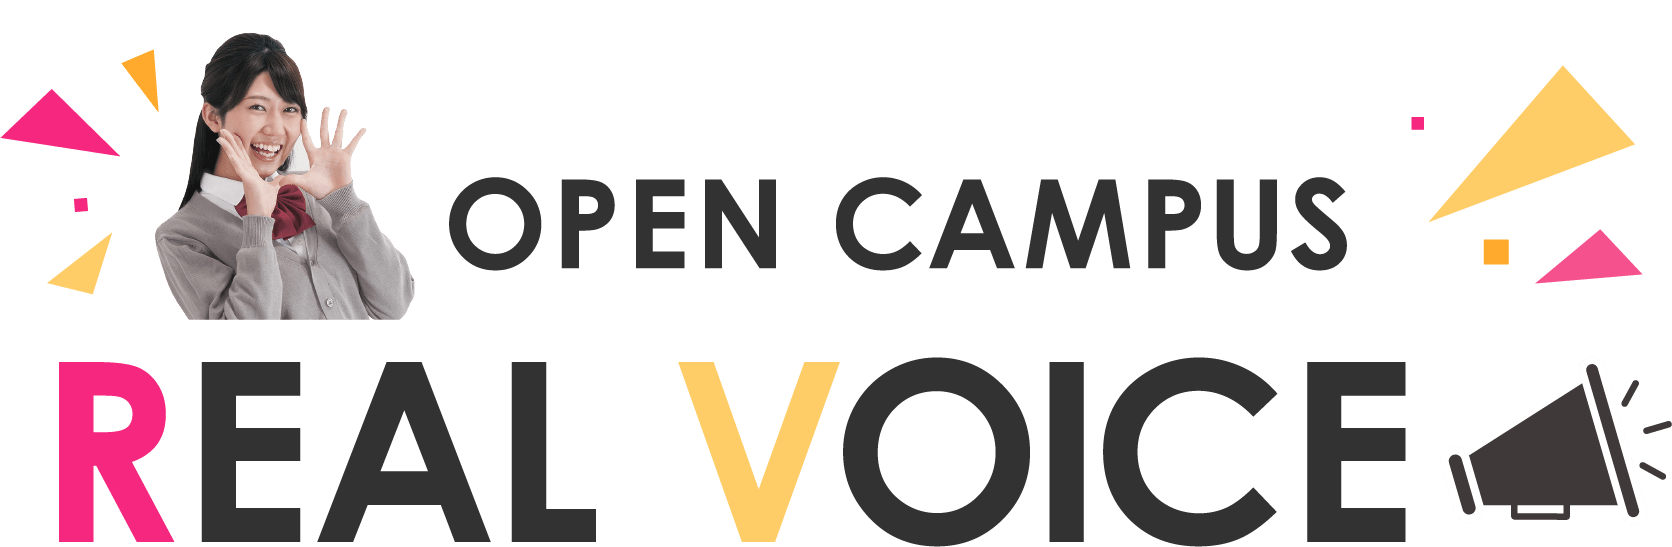 OPEN CAMPUS REAL VOICE